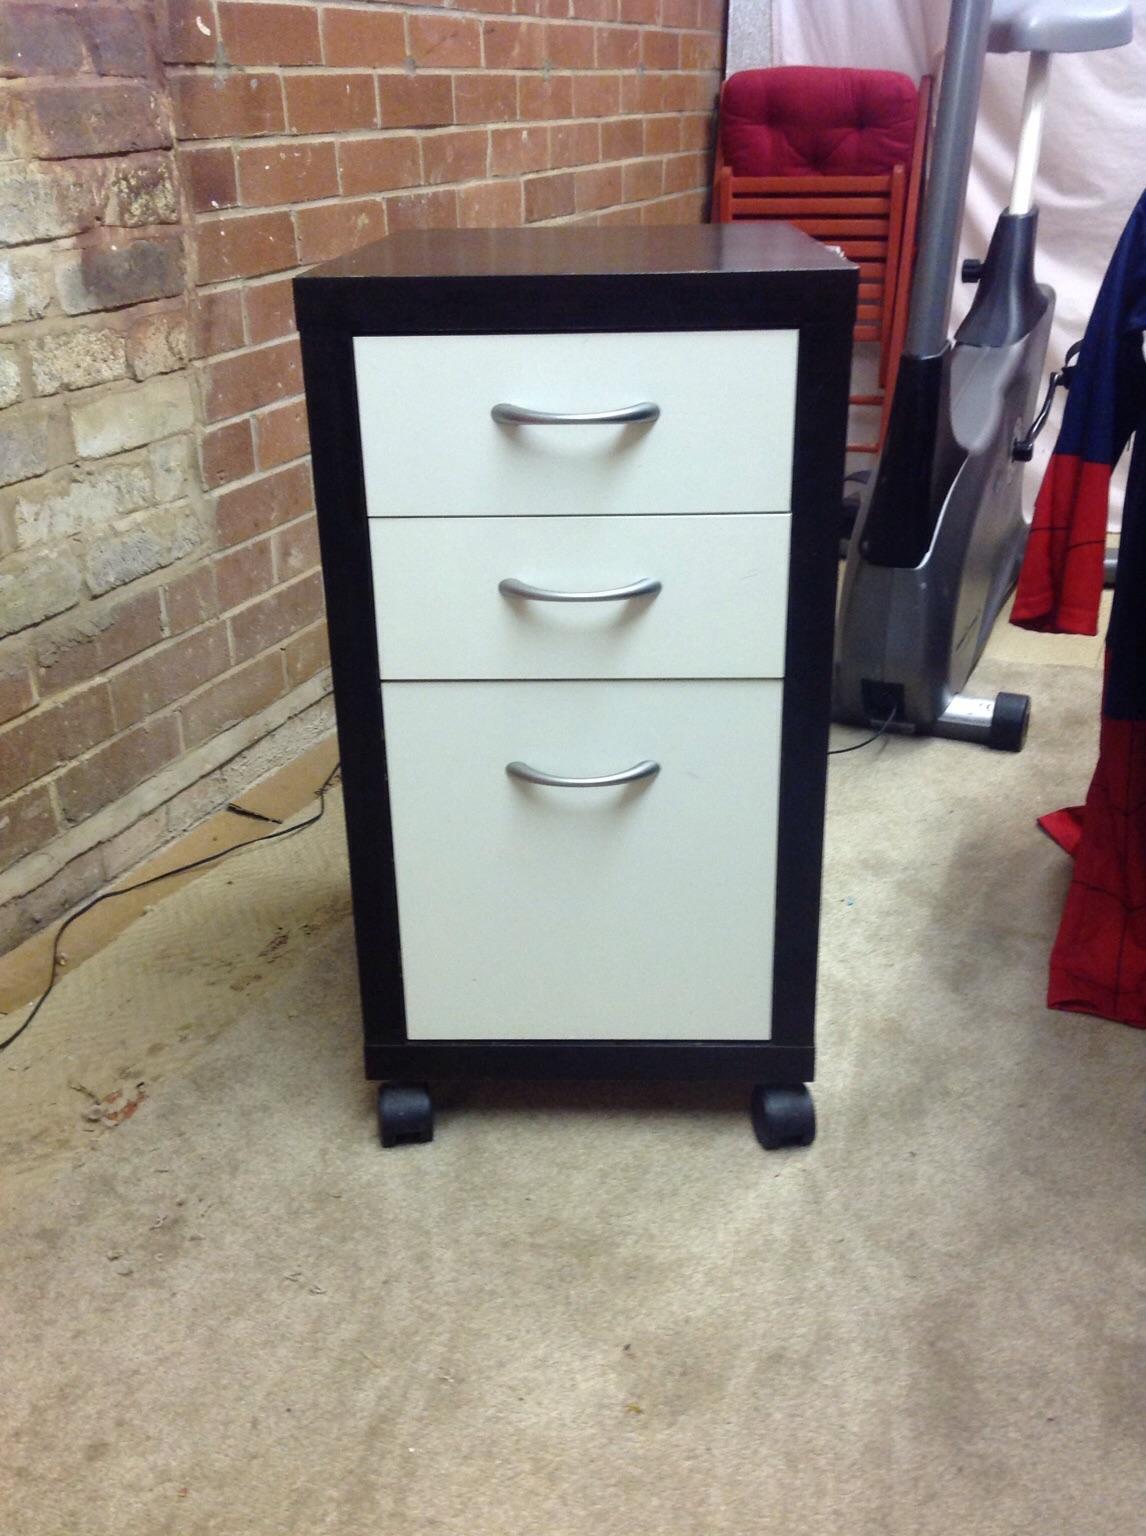 Ikea Mikael Filing Cabinet Drawer Unit In Wigan For 10 00 For